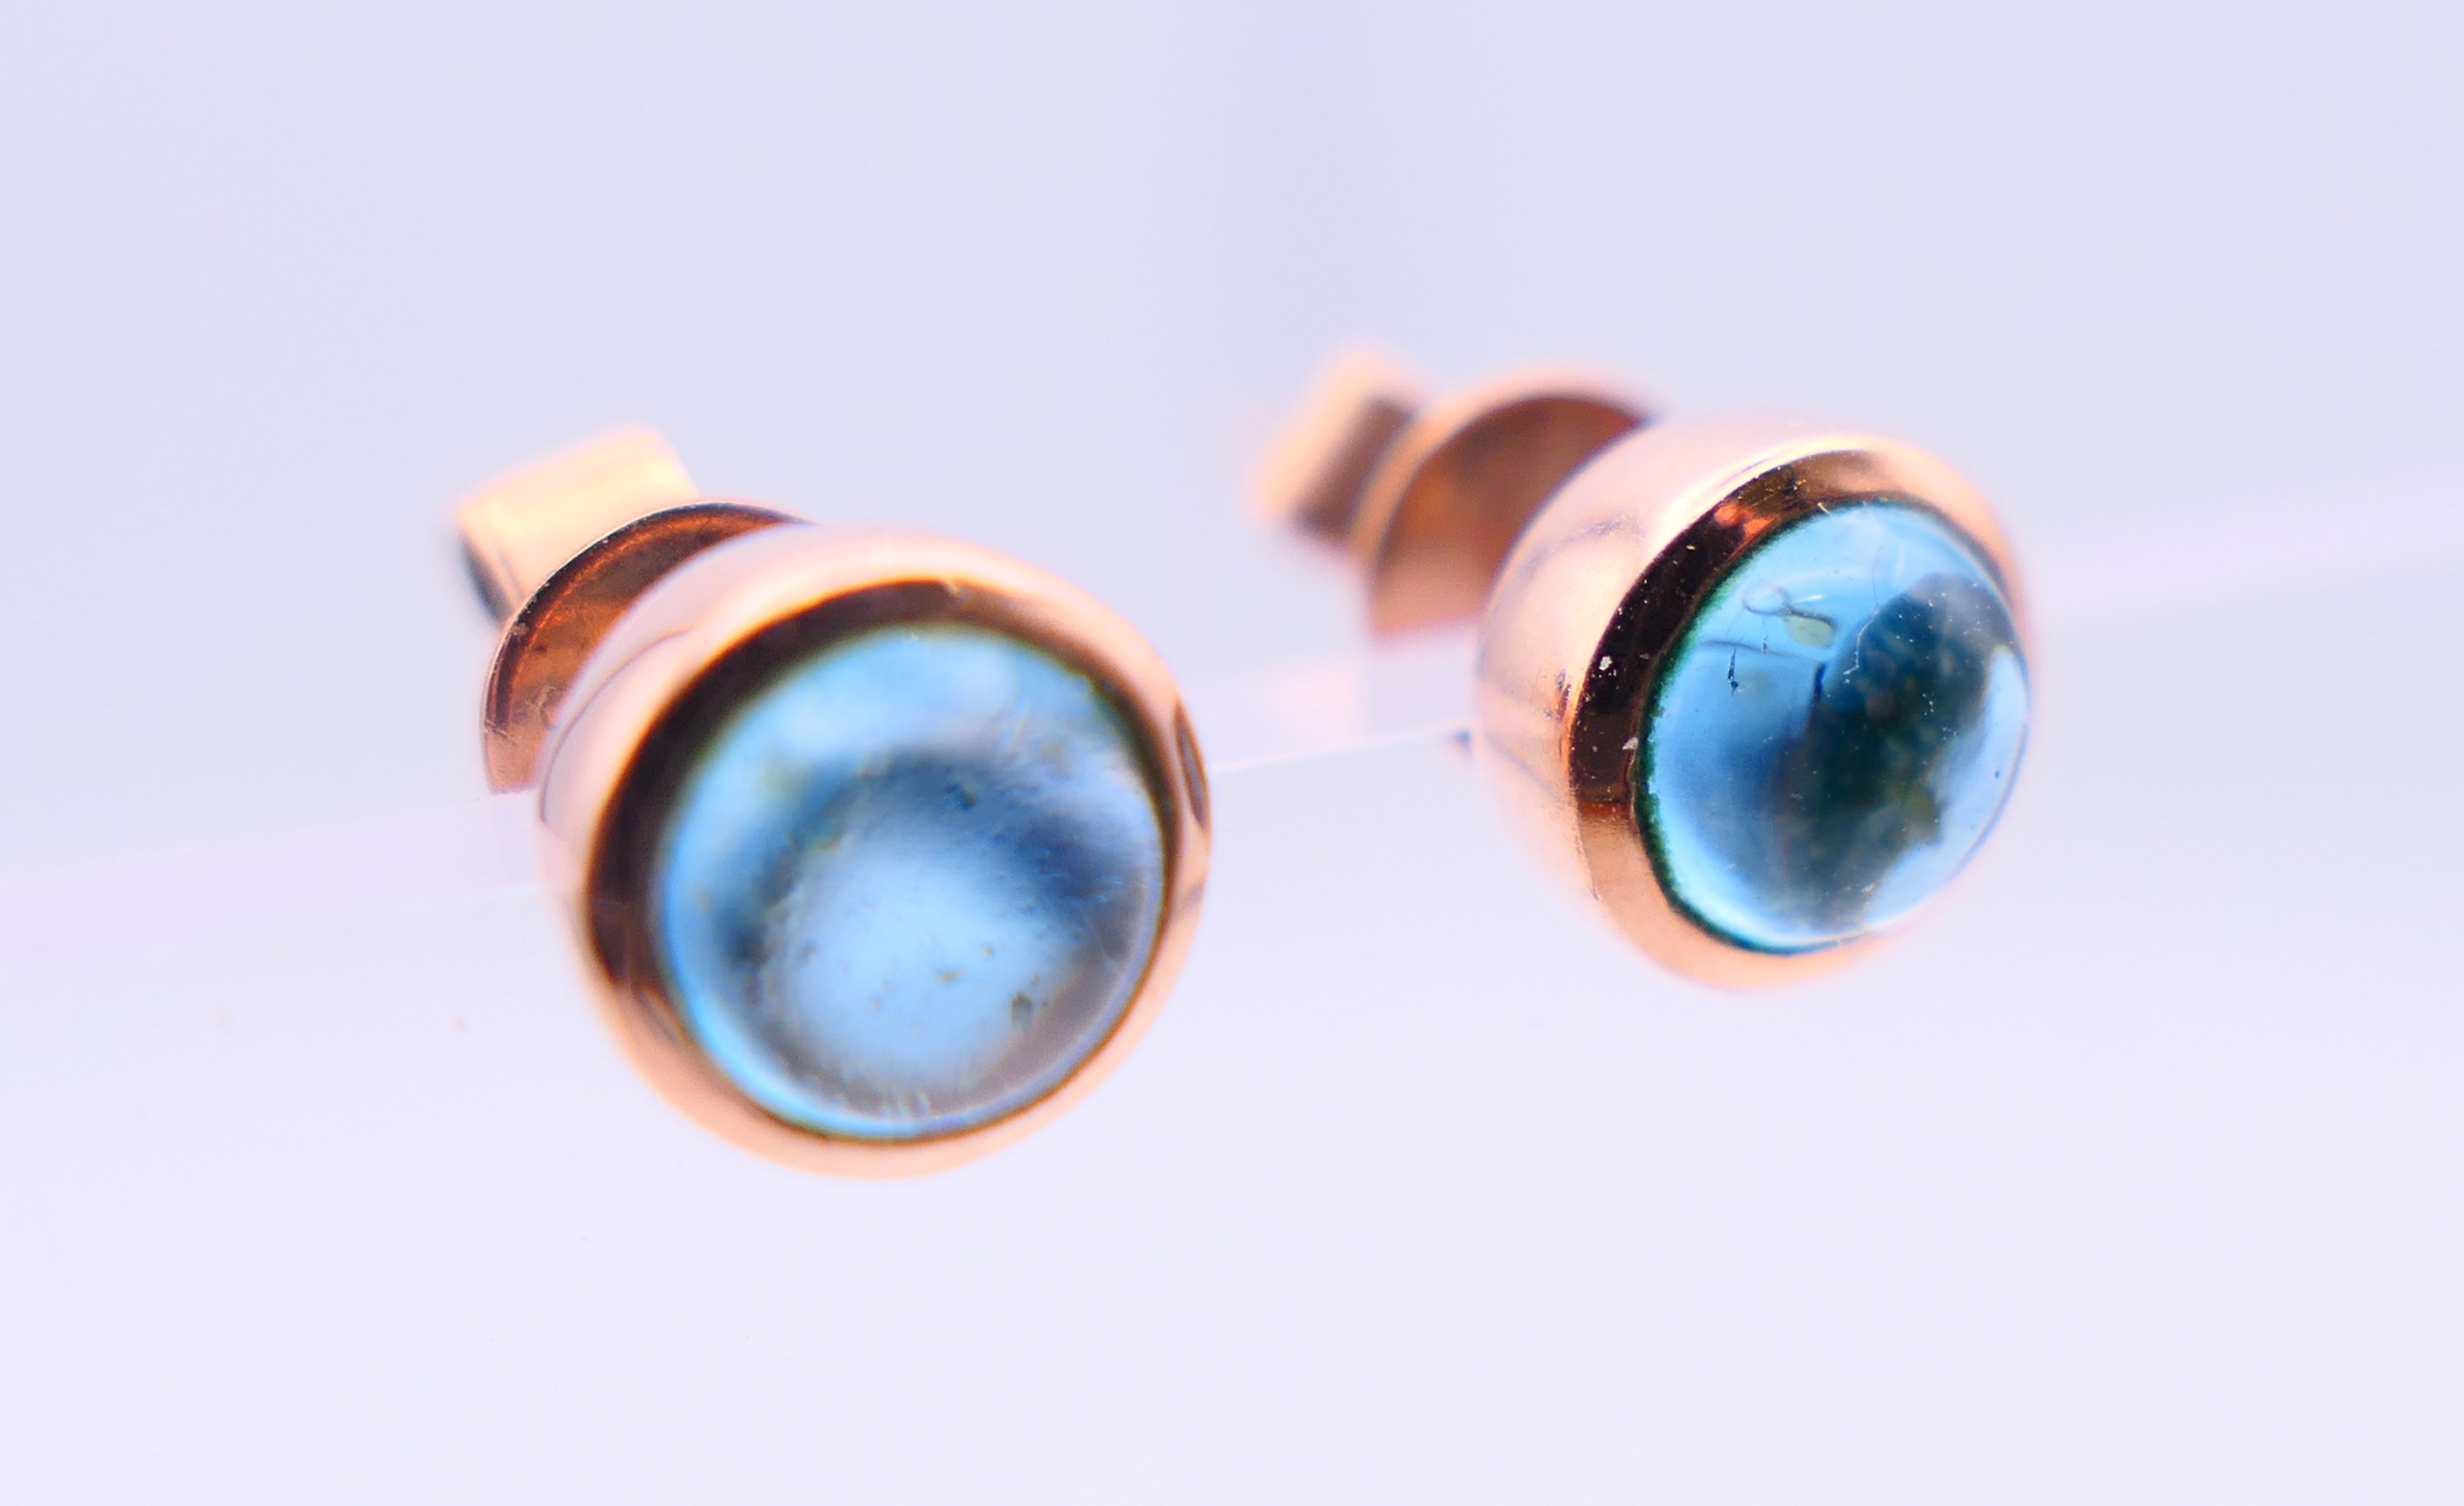 A pair of 9 ct rose gold earrings set with star cut/cabochon topaz gemstones. 0.5 cm diameter. - Image 3 of 6